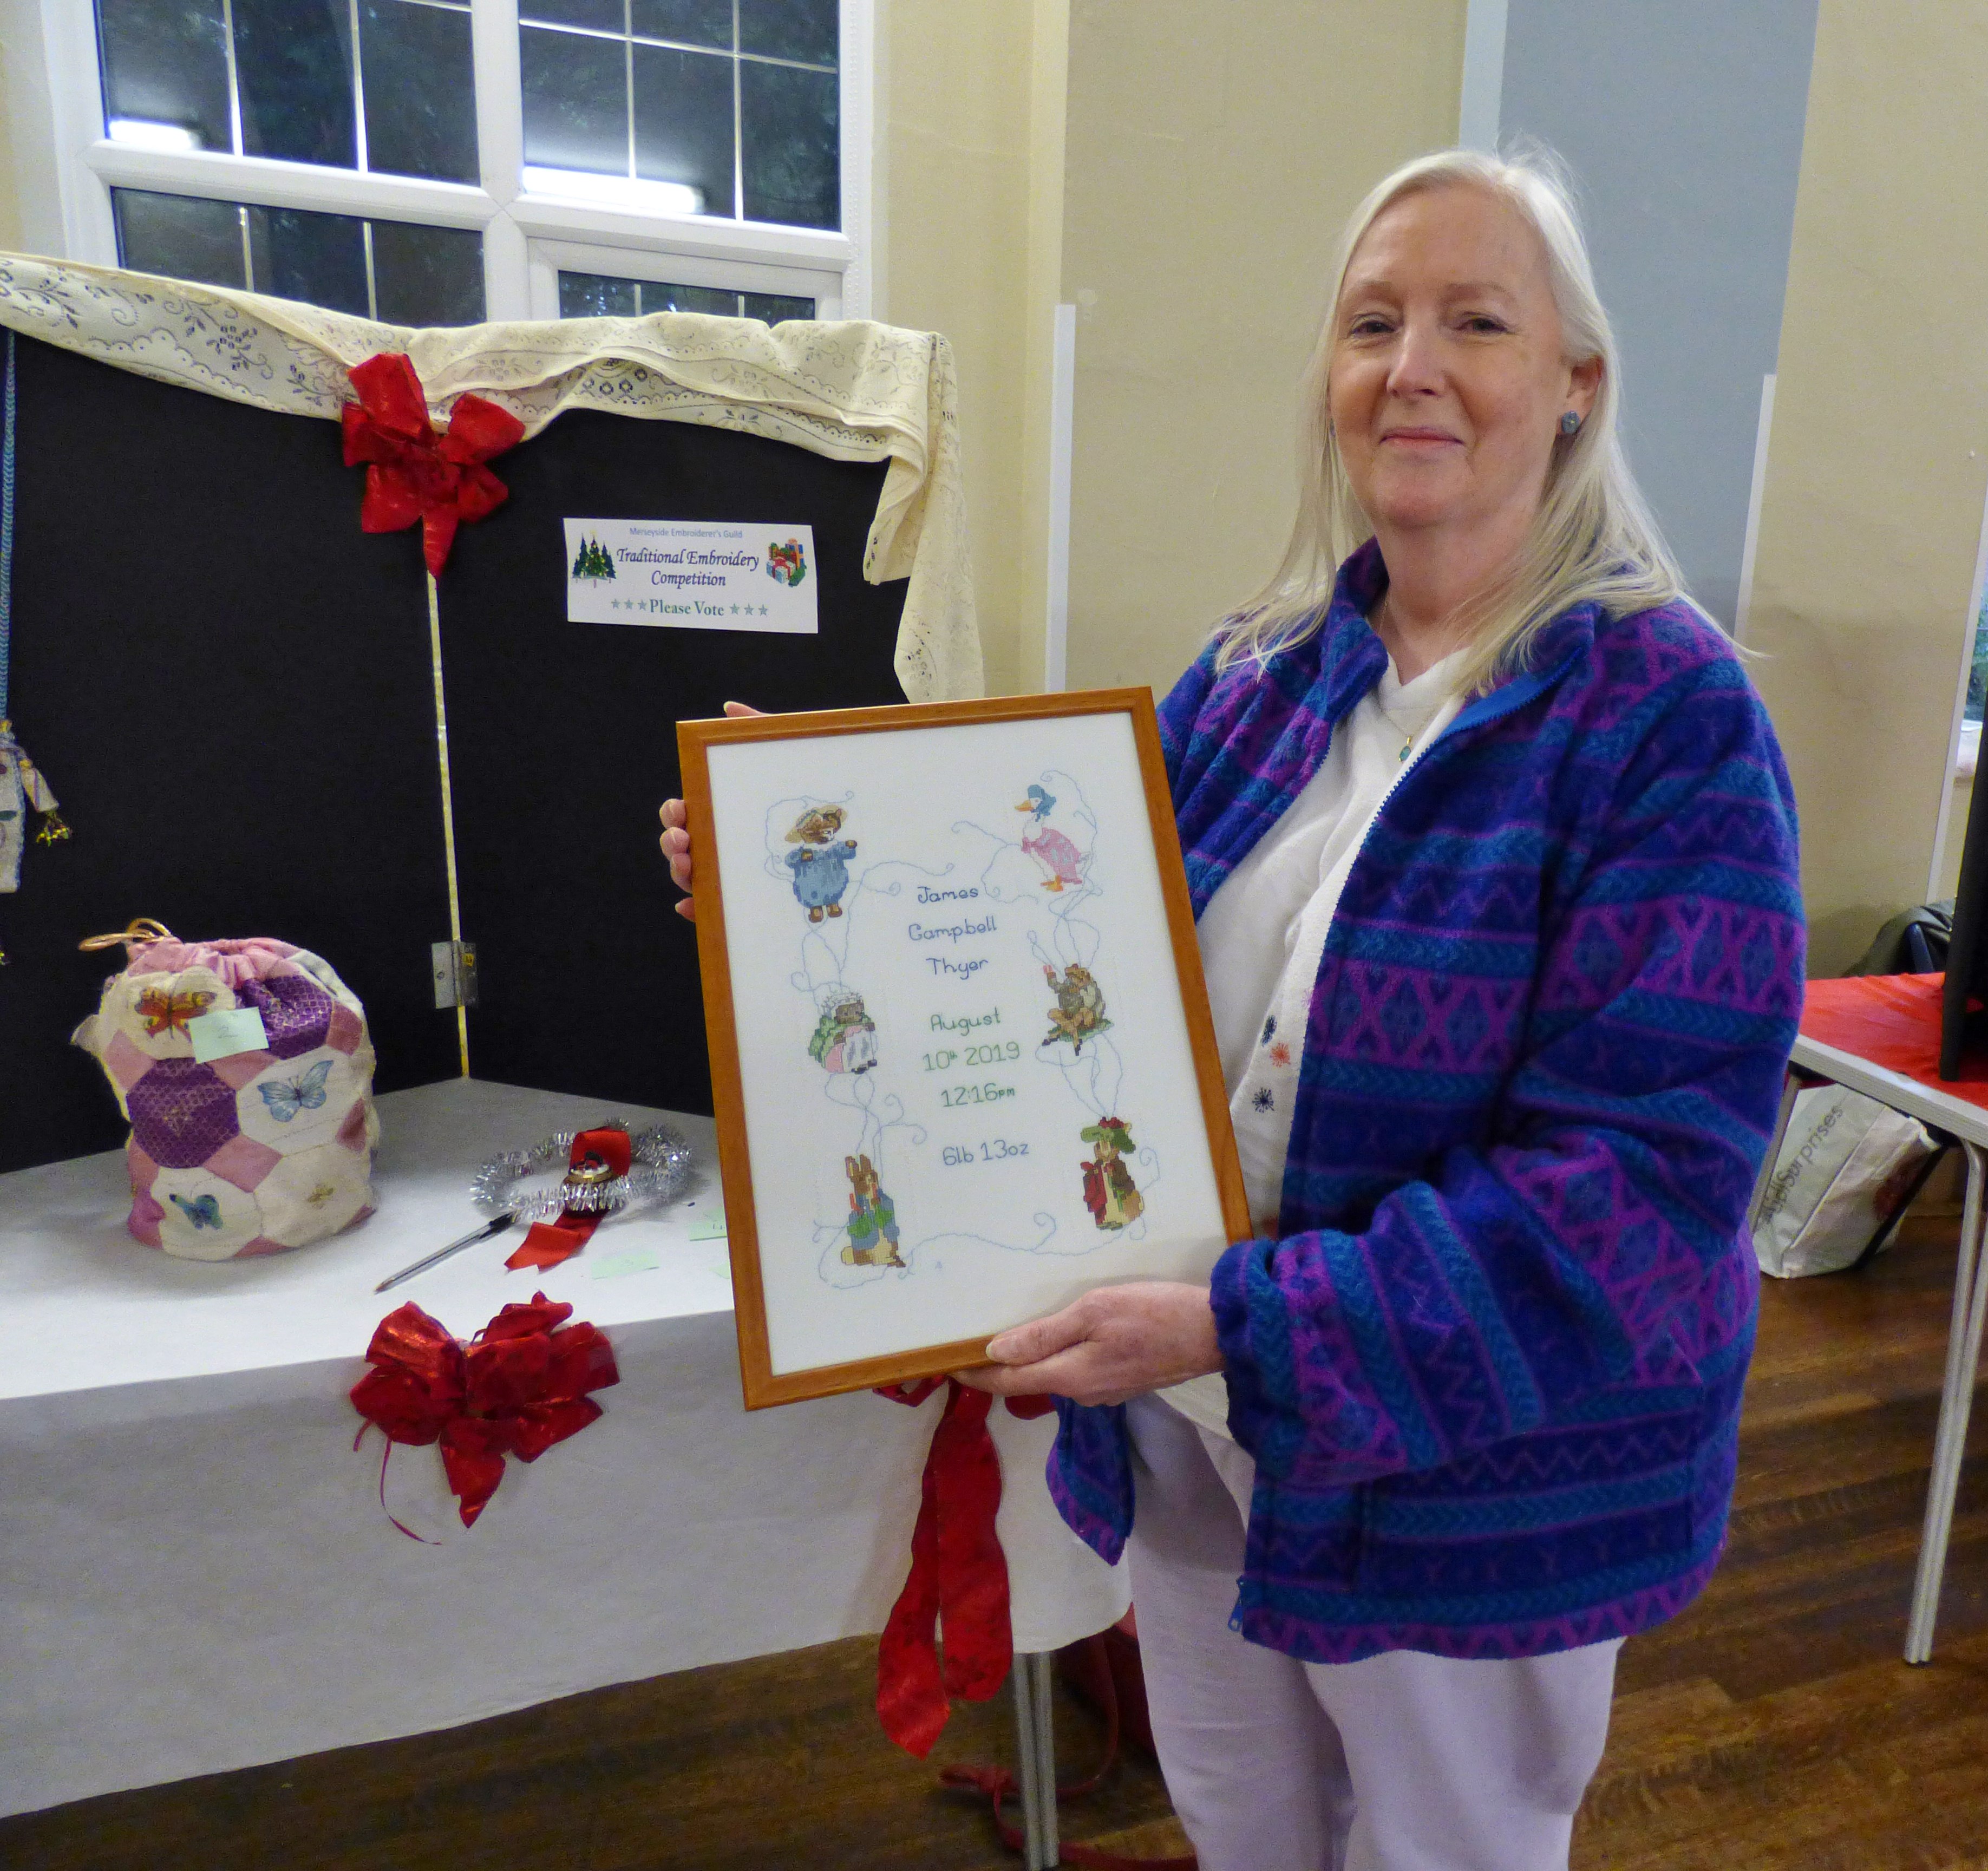 winner of 2019 Traditional Embroidery competition 2019 was Ann Thyer with her beautiful cross stitch birth sampler at MEG Christmas Party 2019